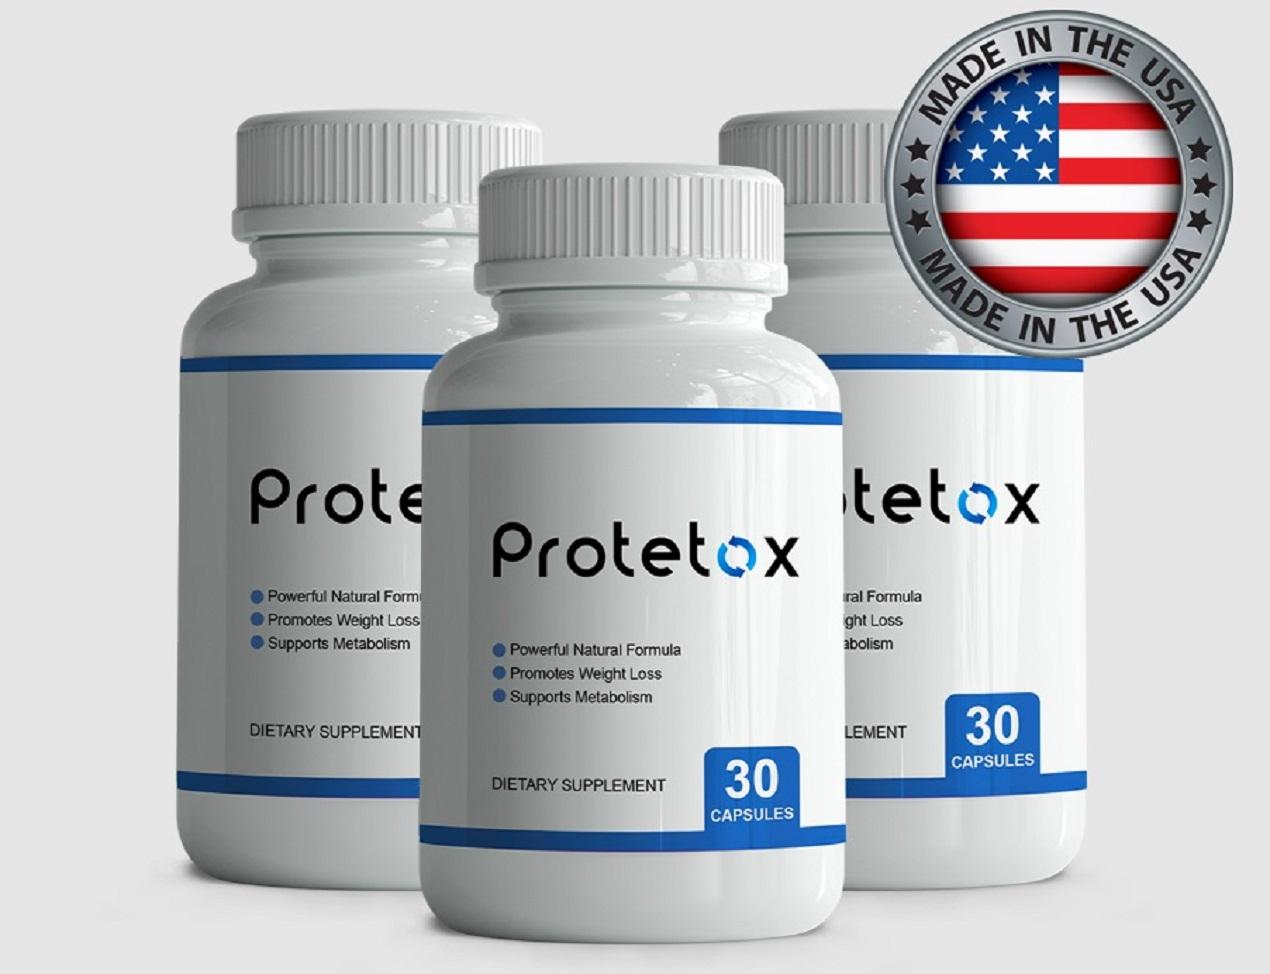 #Protetox #Reviews: Customer Complaints, Side Effects, #Ingredients, Scam & Official Website!